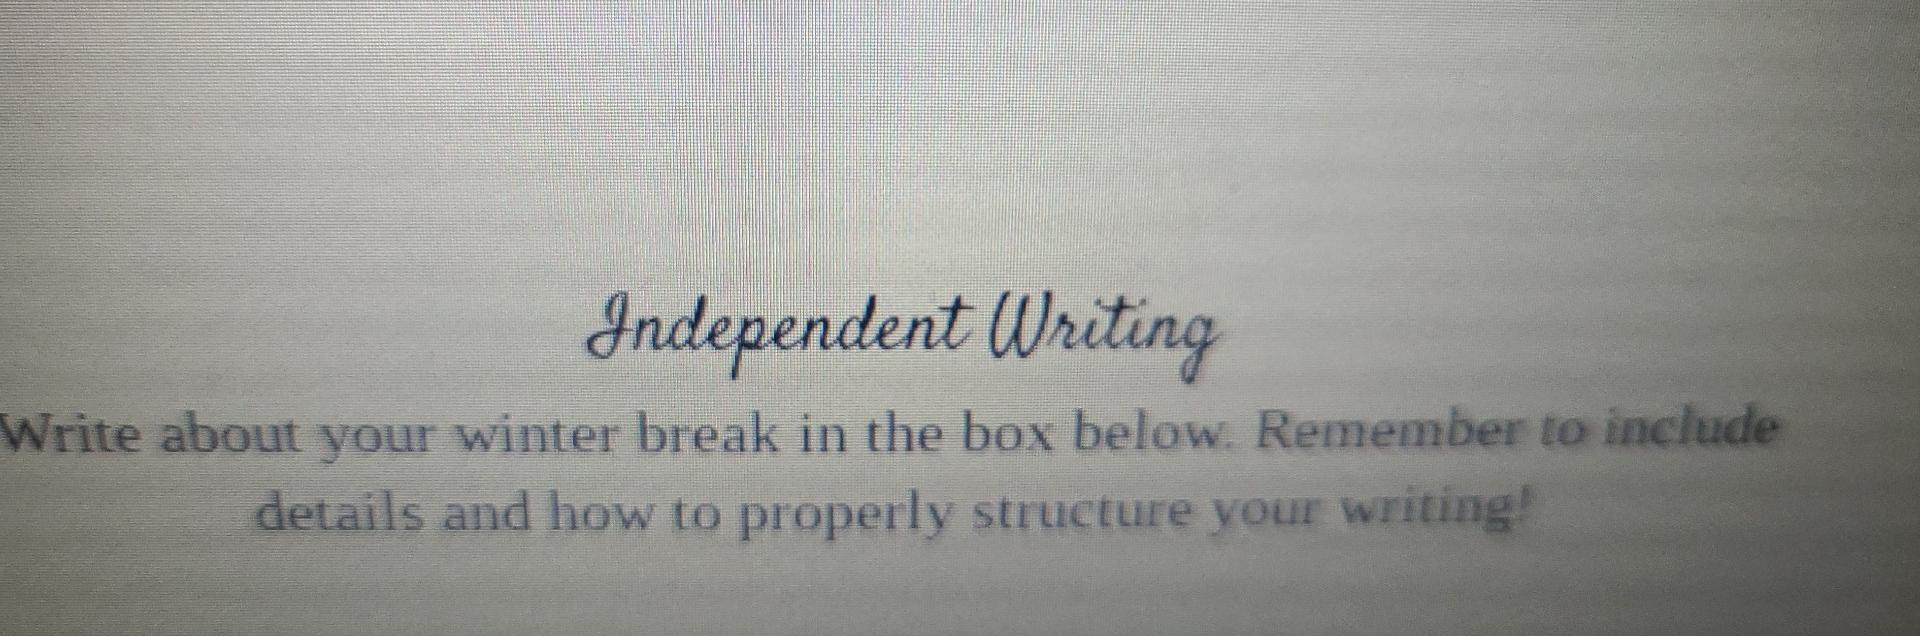 Independent Writing
Write about your winter break in the box below. Remember to include
details and how to properly structure